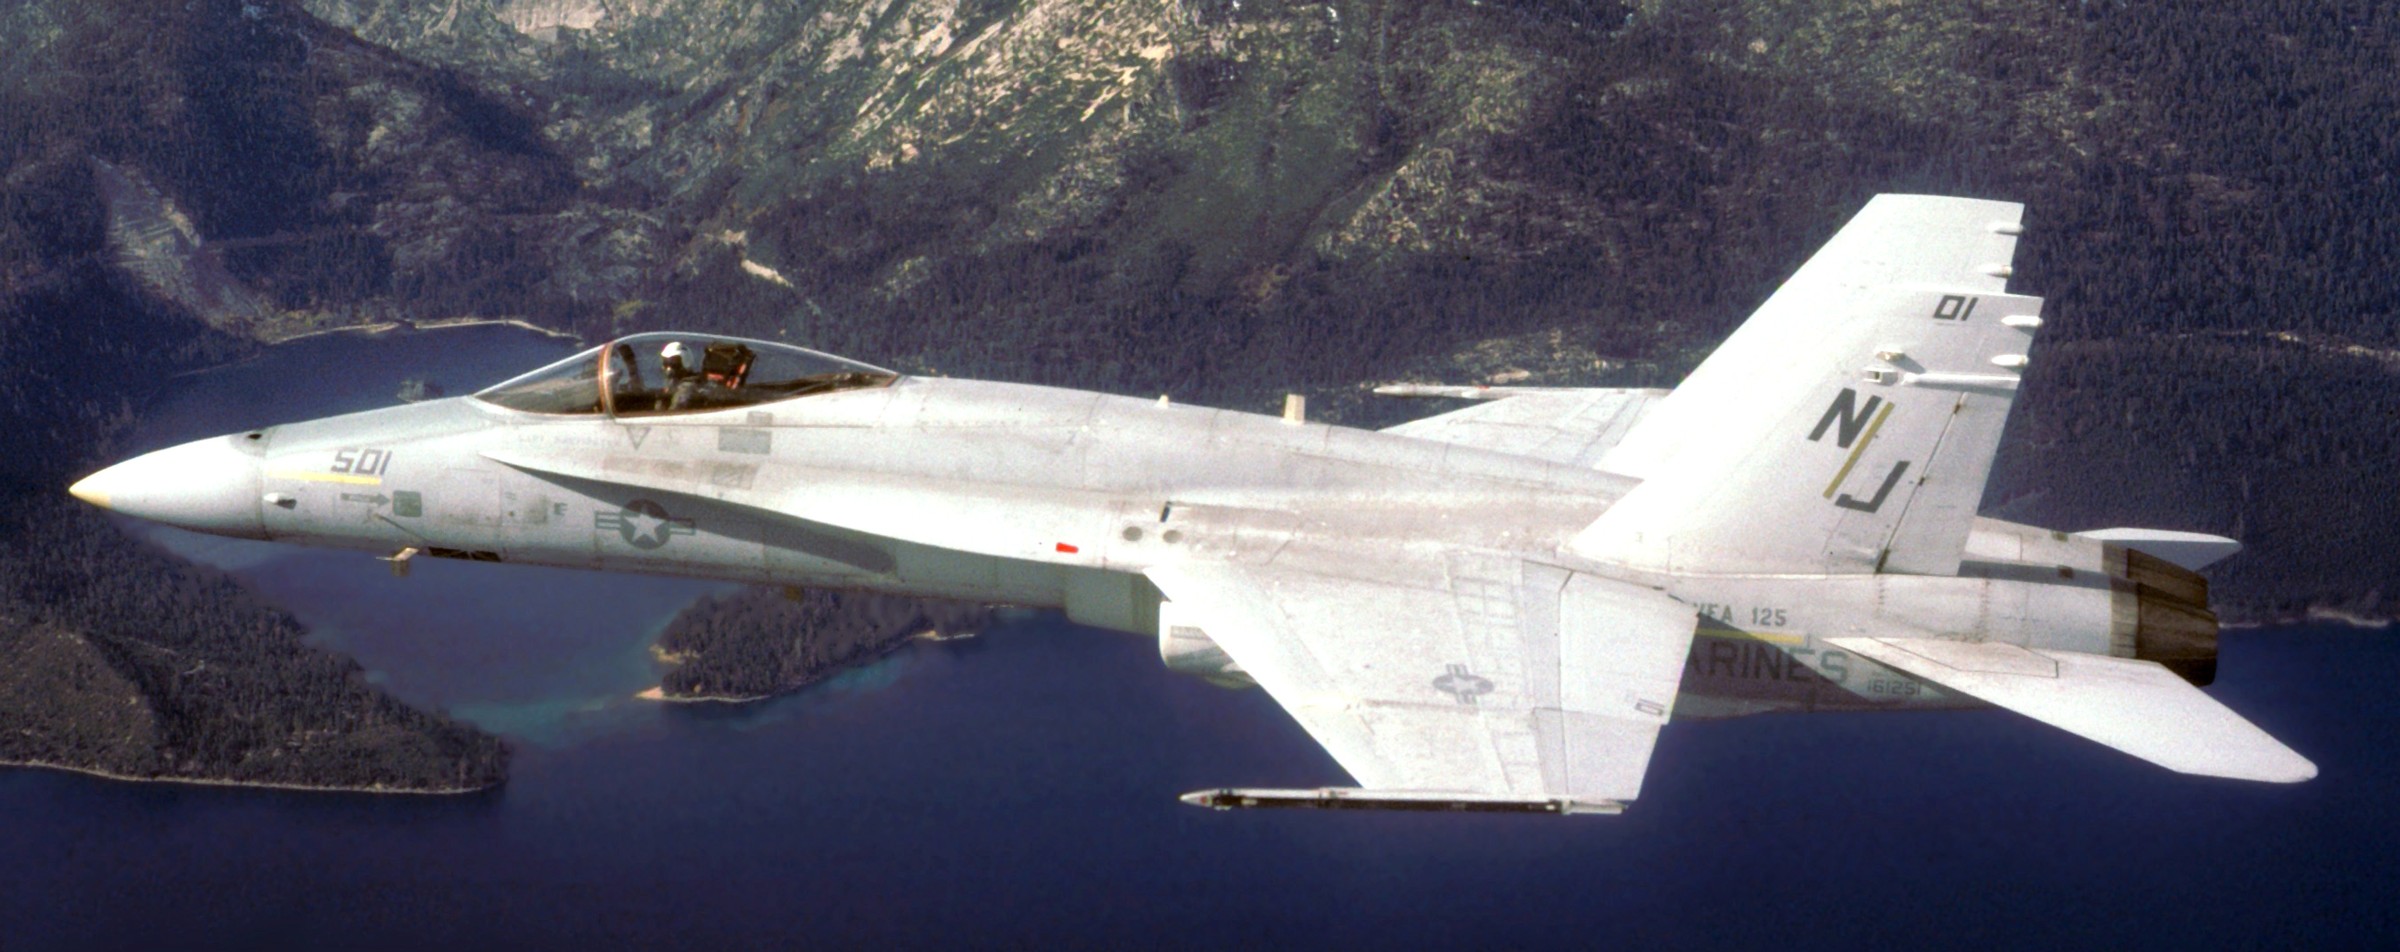 vfa-125 rough raiders strike fighter squadron f/a-18a hornet 1981 36 lake tahoe